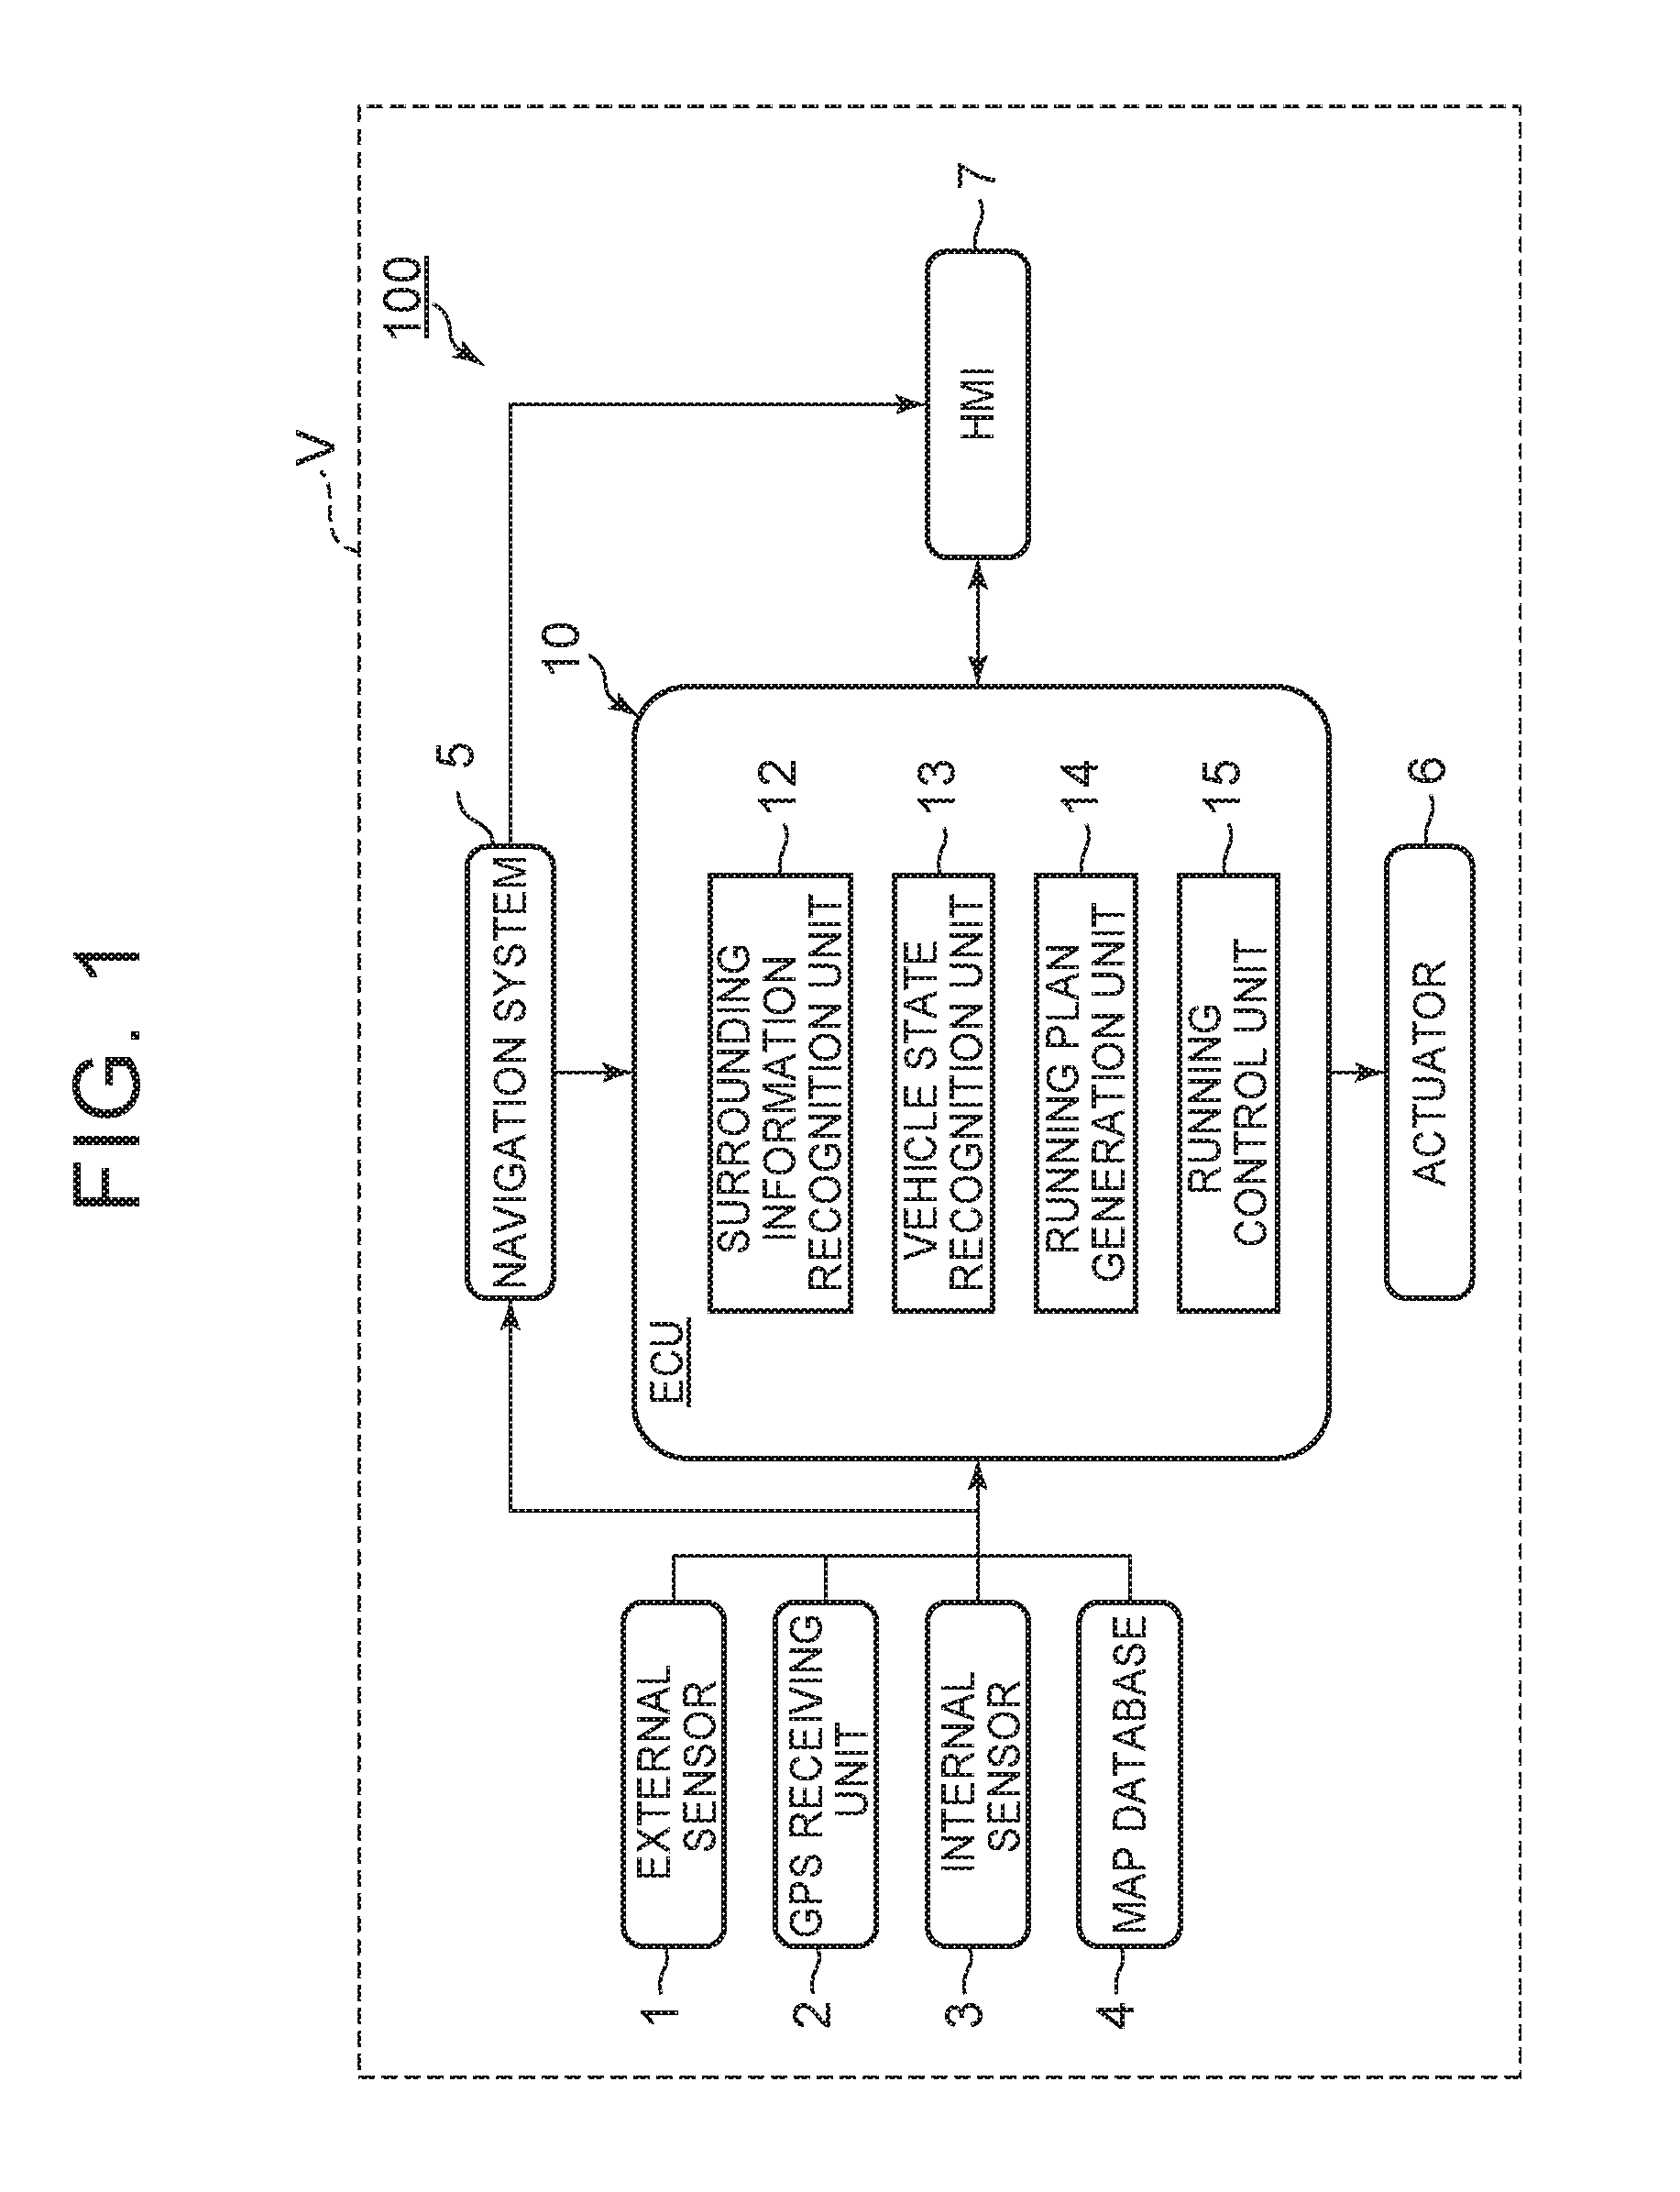 Automatic driving vehicle system